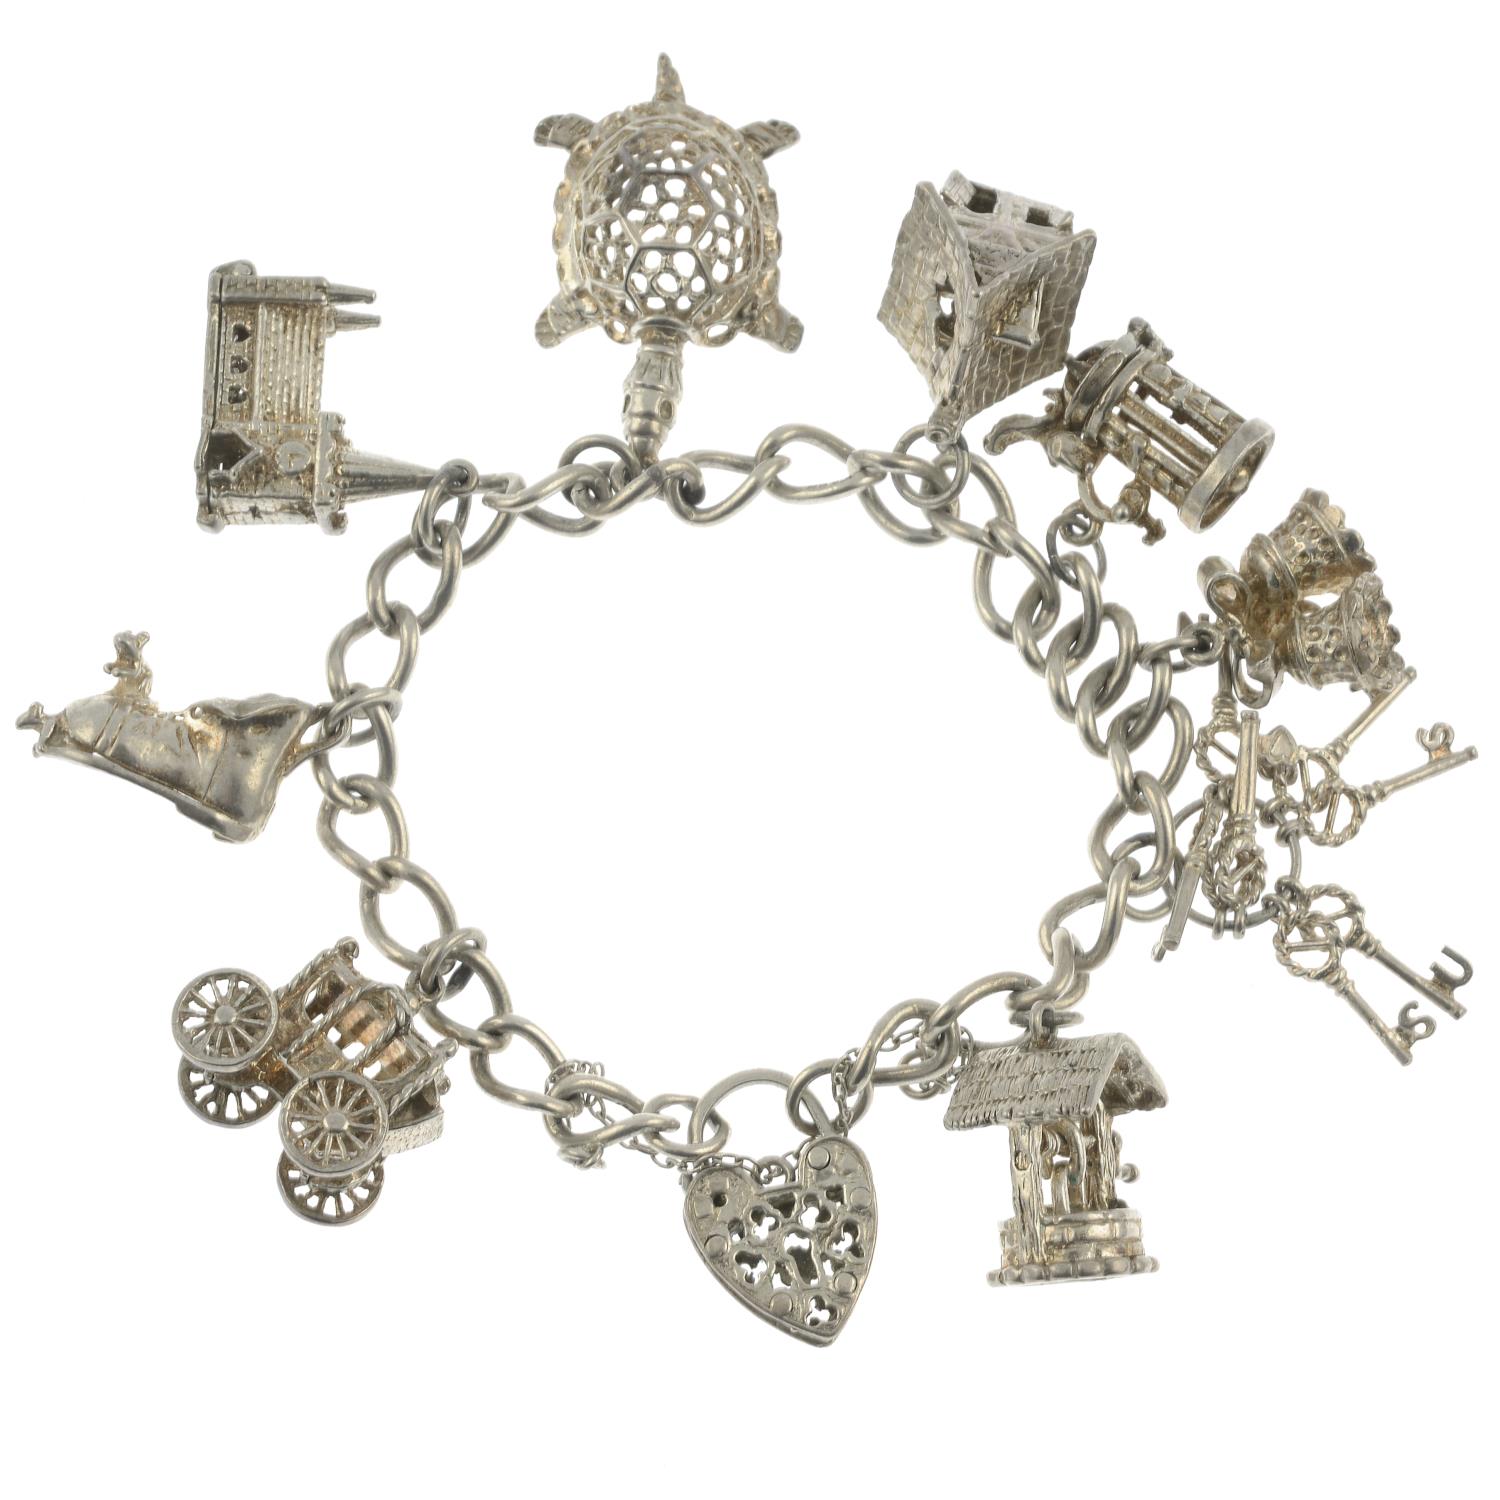 Two silver charm bracelets and assorted charms.Hallmarks for Birmingham and London.Lengths 18 and